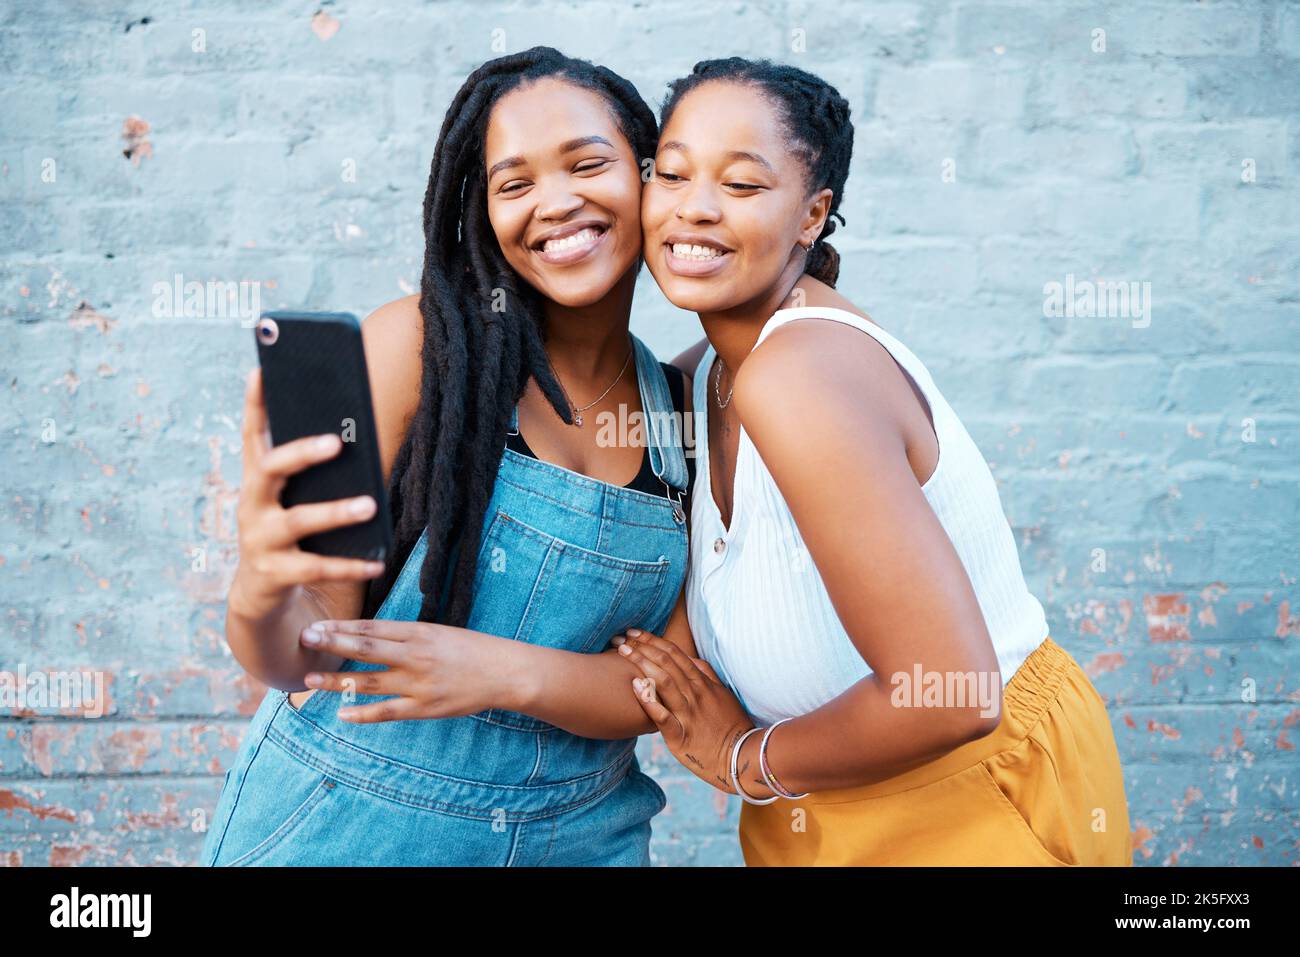 Black women, friends and selfie while smiling and happy outside against city or urban wall and posing for friendship social media picture outside Stock Photo